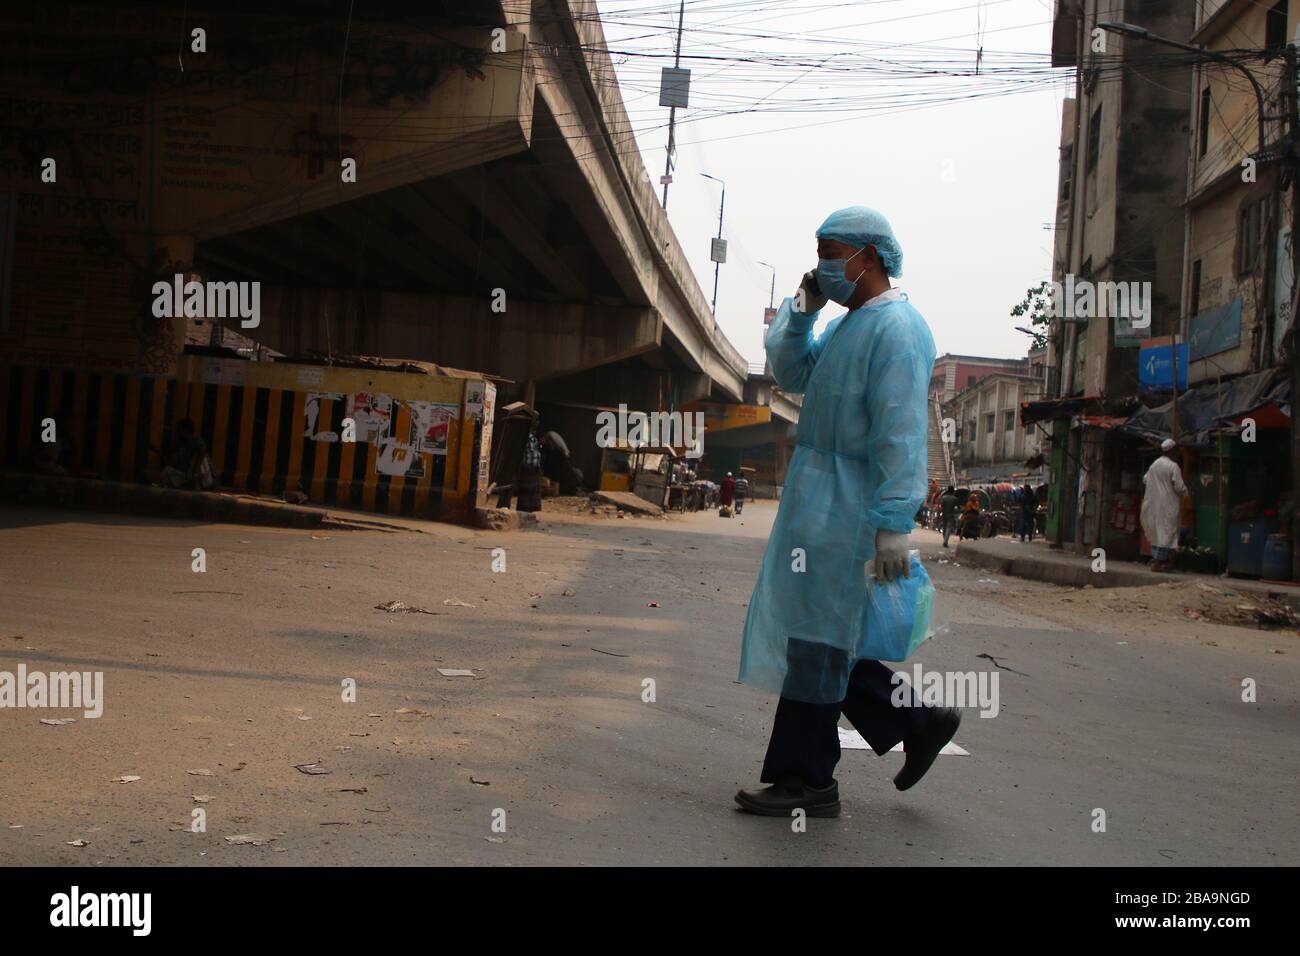 A man wearing a protective suit walks across a deserted road amid Coronavirus threats in Dhaka. The Institute of Epidemiology, Disease Control and Research (IEDCR) has confirmed that five more people have tested positive for Covid-19 in the last 24 hours. The number of total coronavirus patients in the country stands at 44. Stock Photo